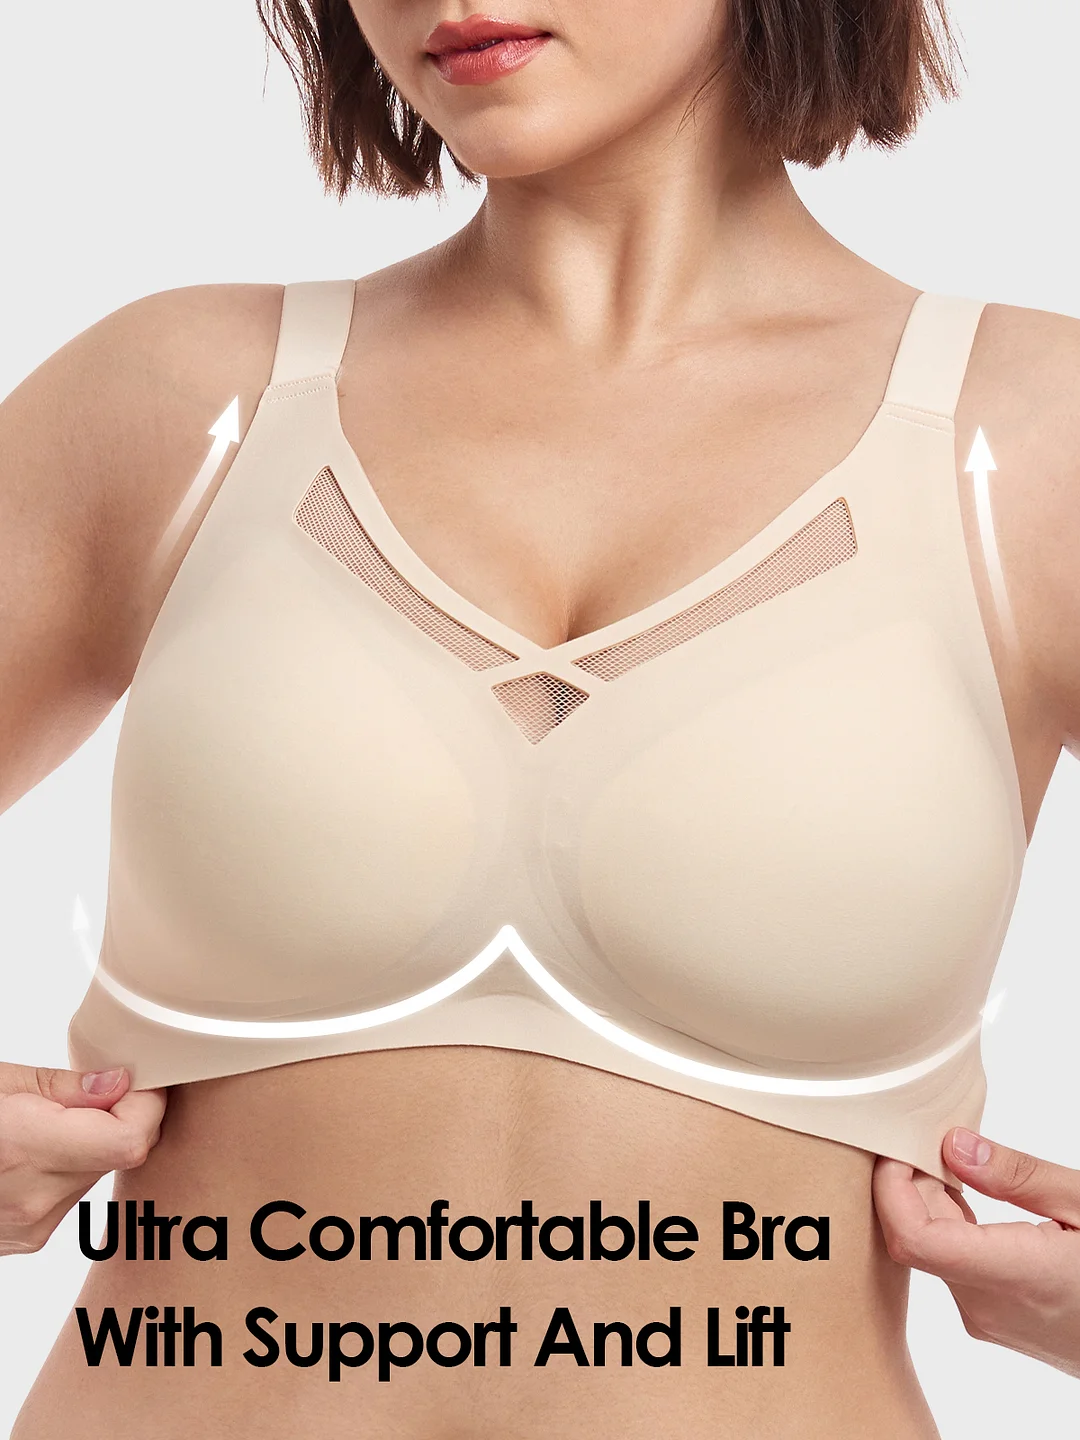 Brabalas Ultimate Comfort Bra for Women, Silky Smooth Bralettes T-Shirt Bra with Support and Lift